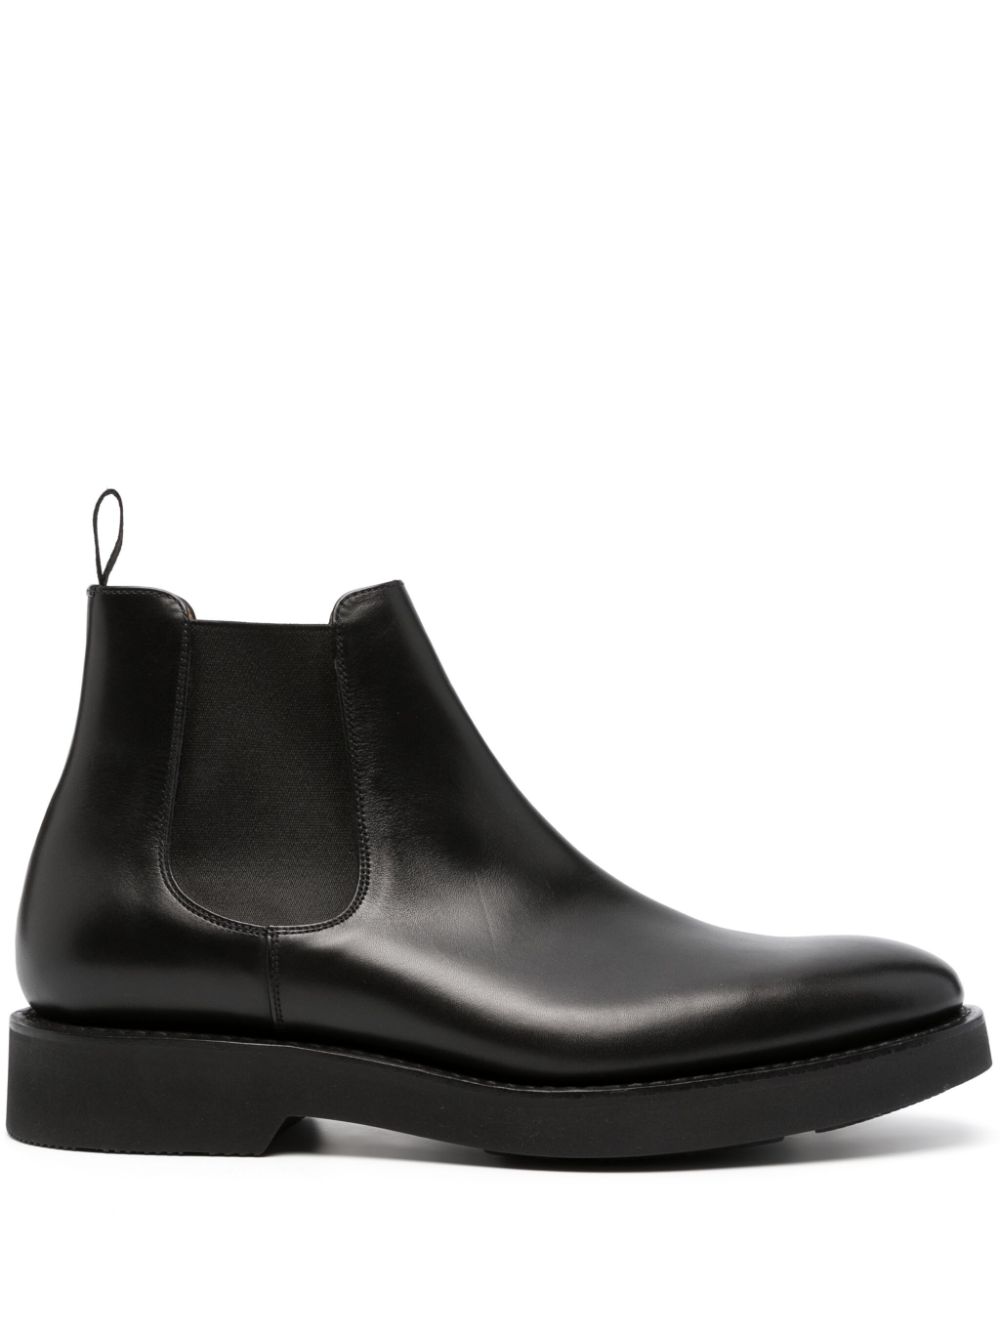 CHURCH'S NEVADA LEATHER CHELSEA BOOTS